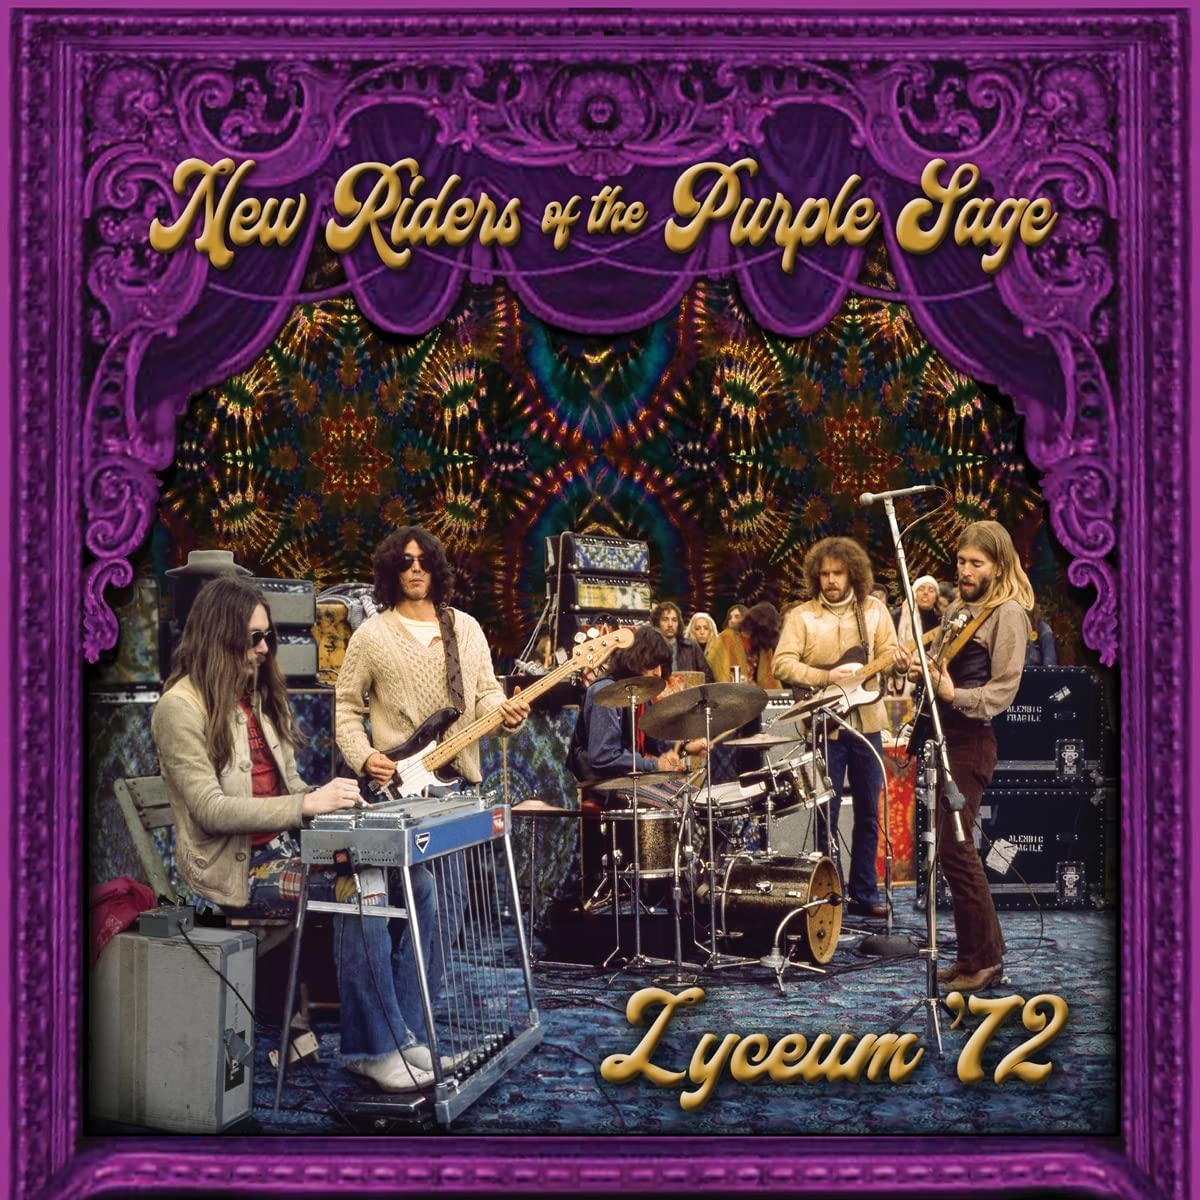 New Riders Of The Purple Sage - Lyceum '72 - CD